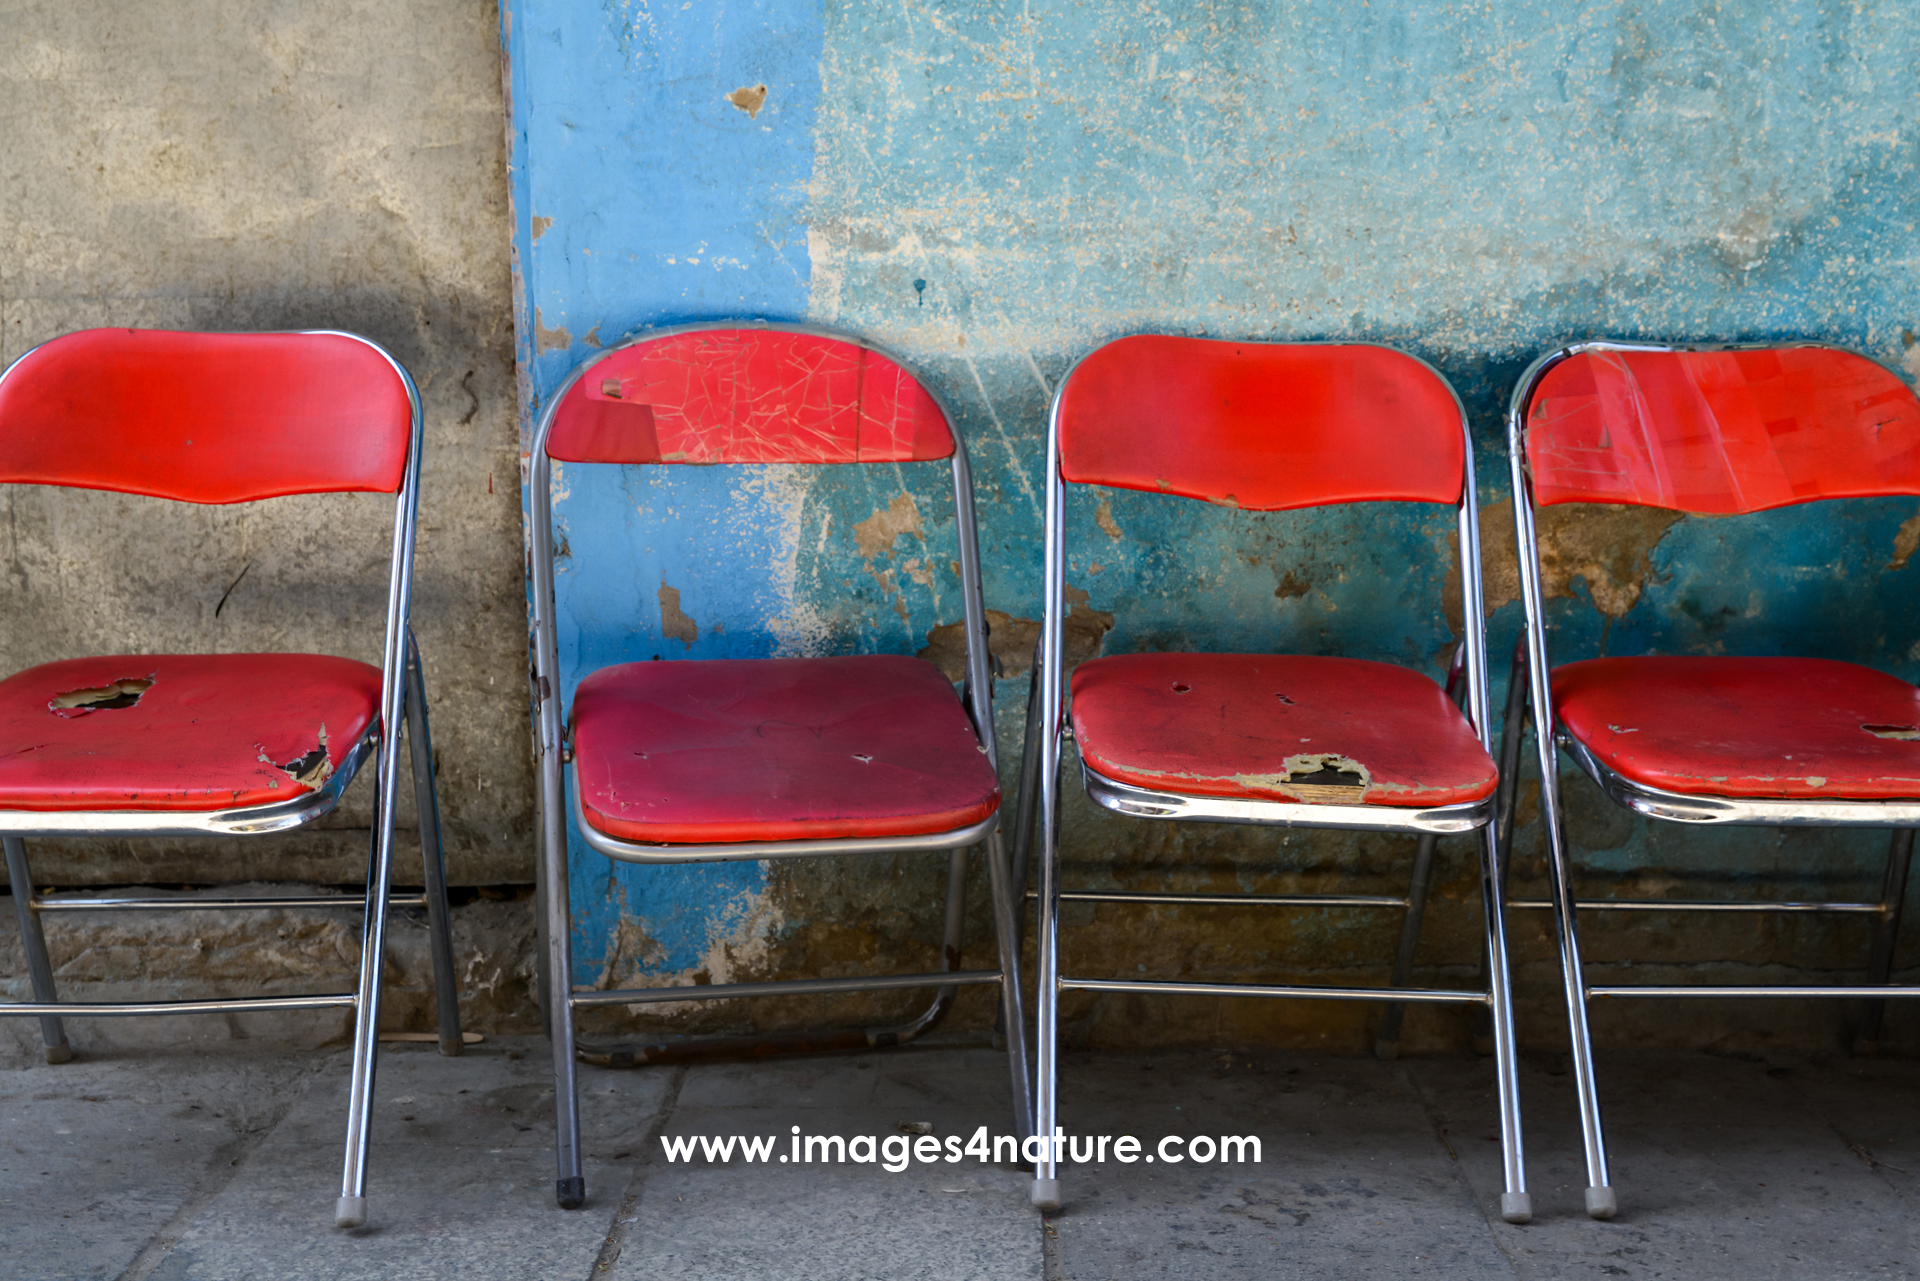 Line-up of four metal chairs with red seats and backs in front of a weathered blue wall